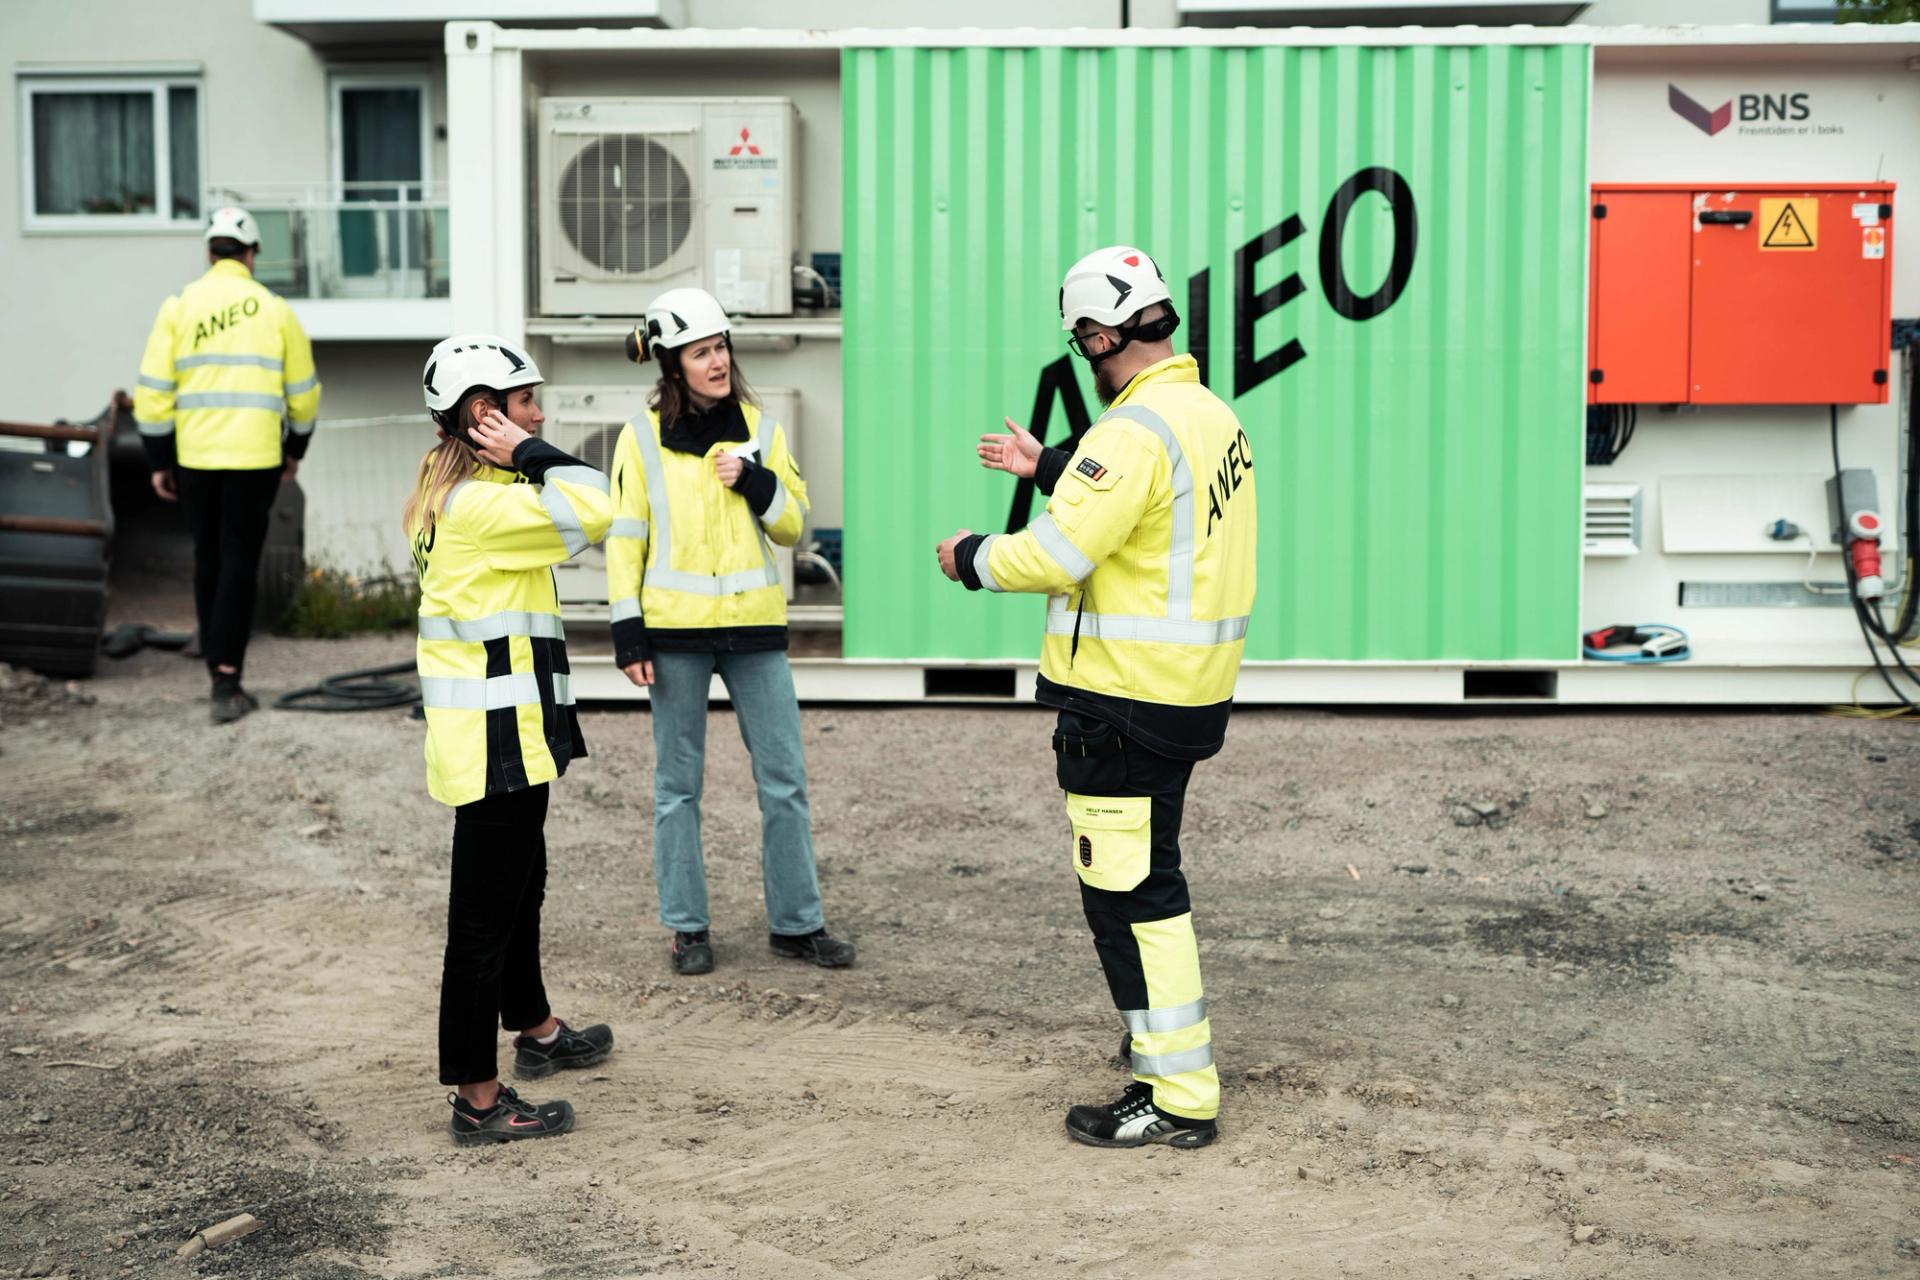 Four people in yellow work jackets and hard hats in front of a green charger container